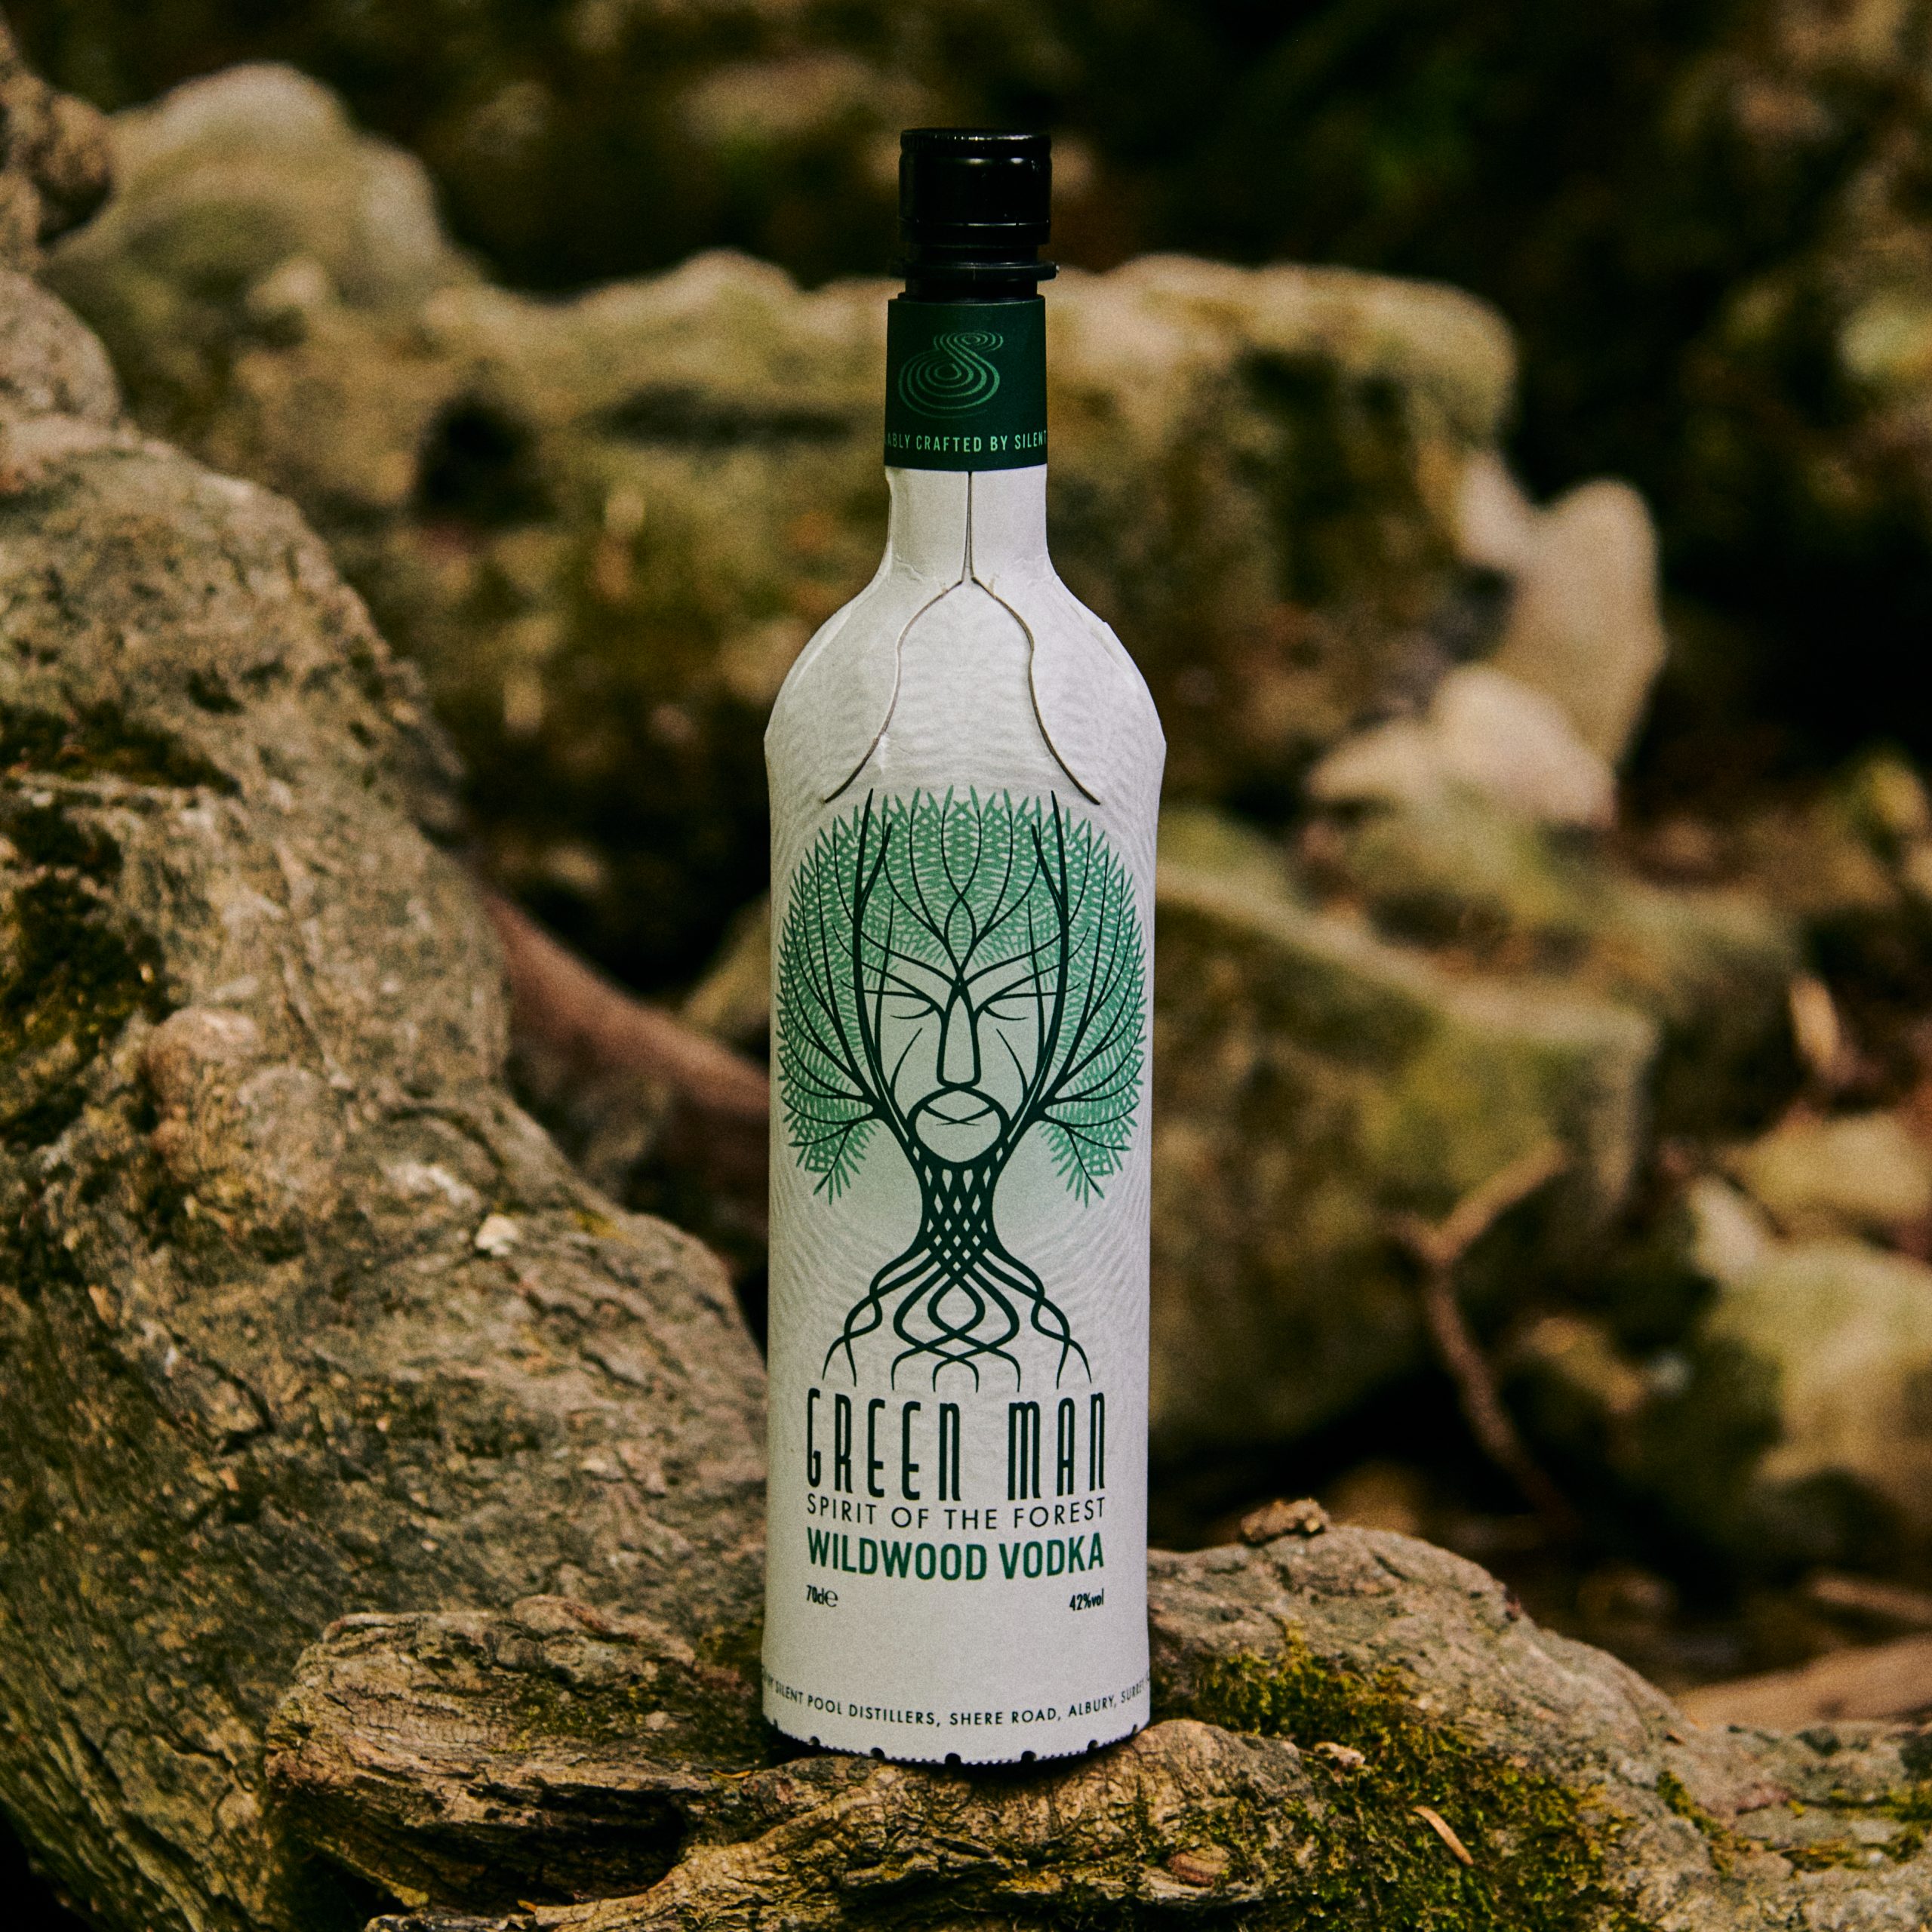 Silent Pool launches vodka in a 94% recyclable cardboard bottle